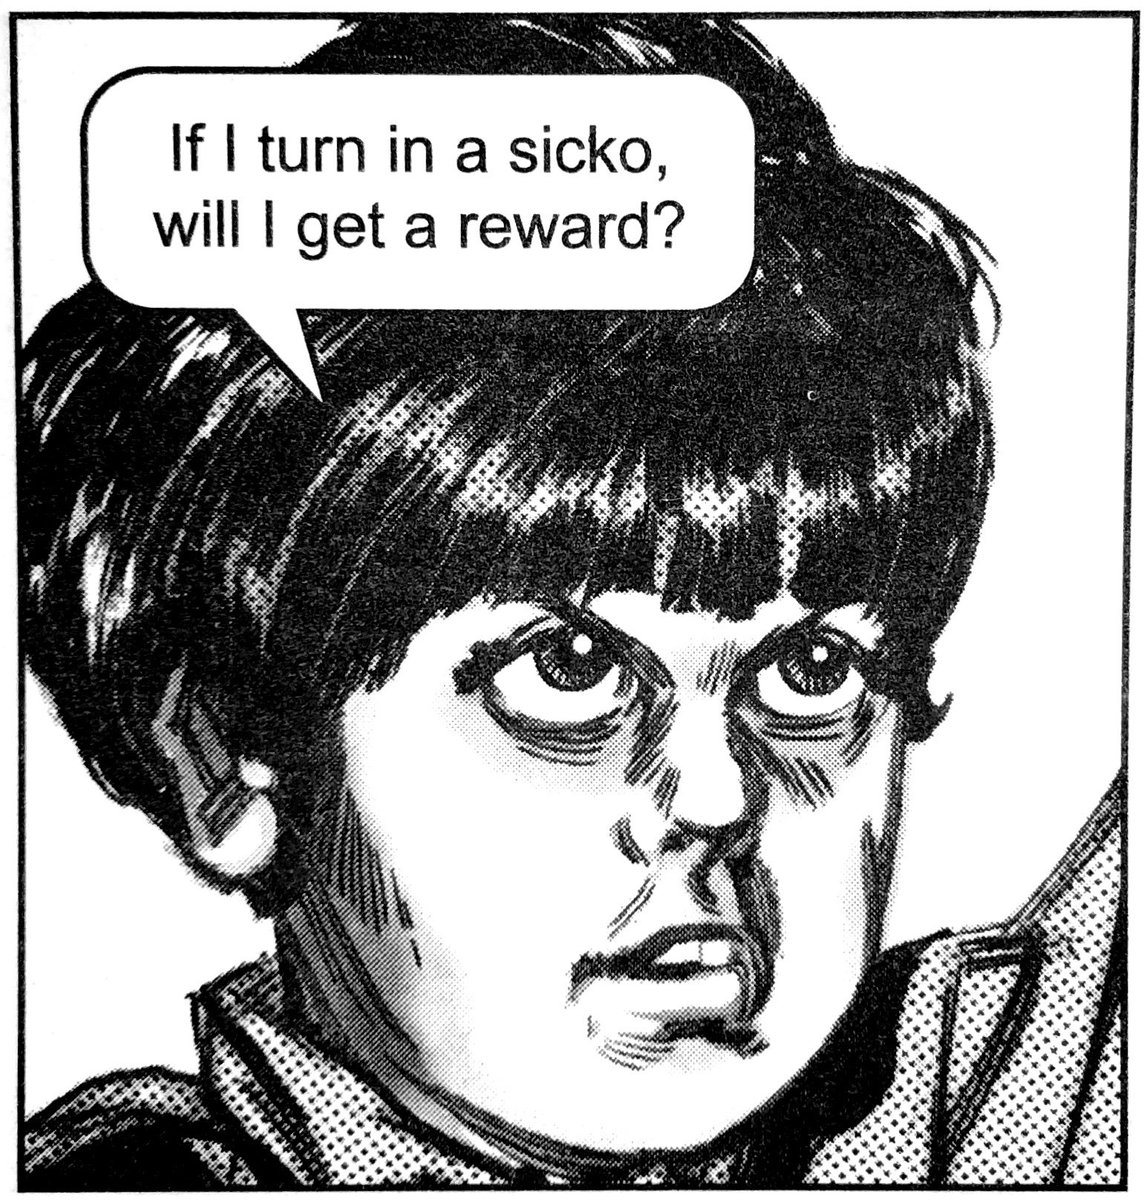 No Context Chick Tracts.